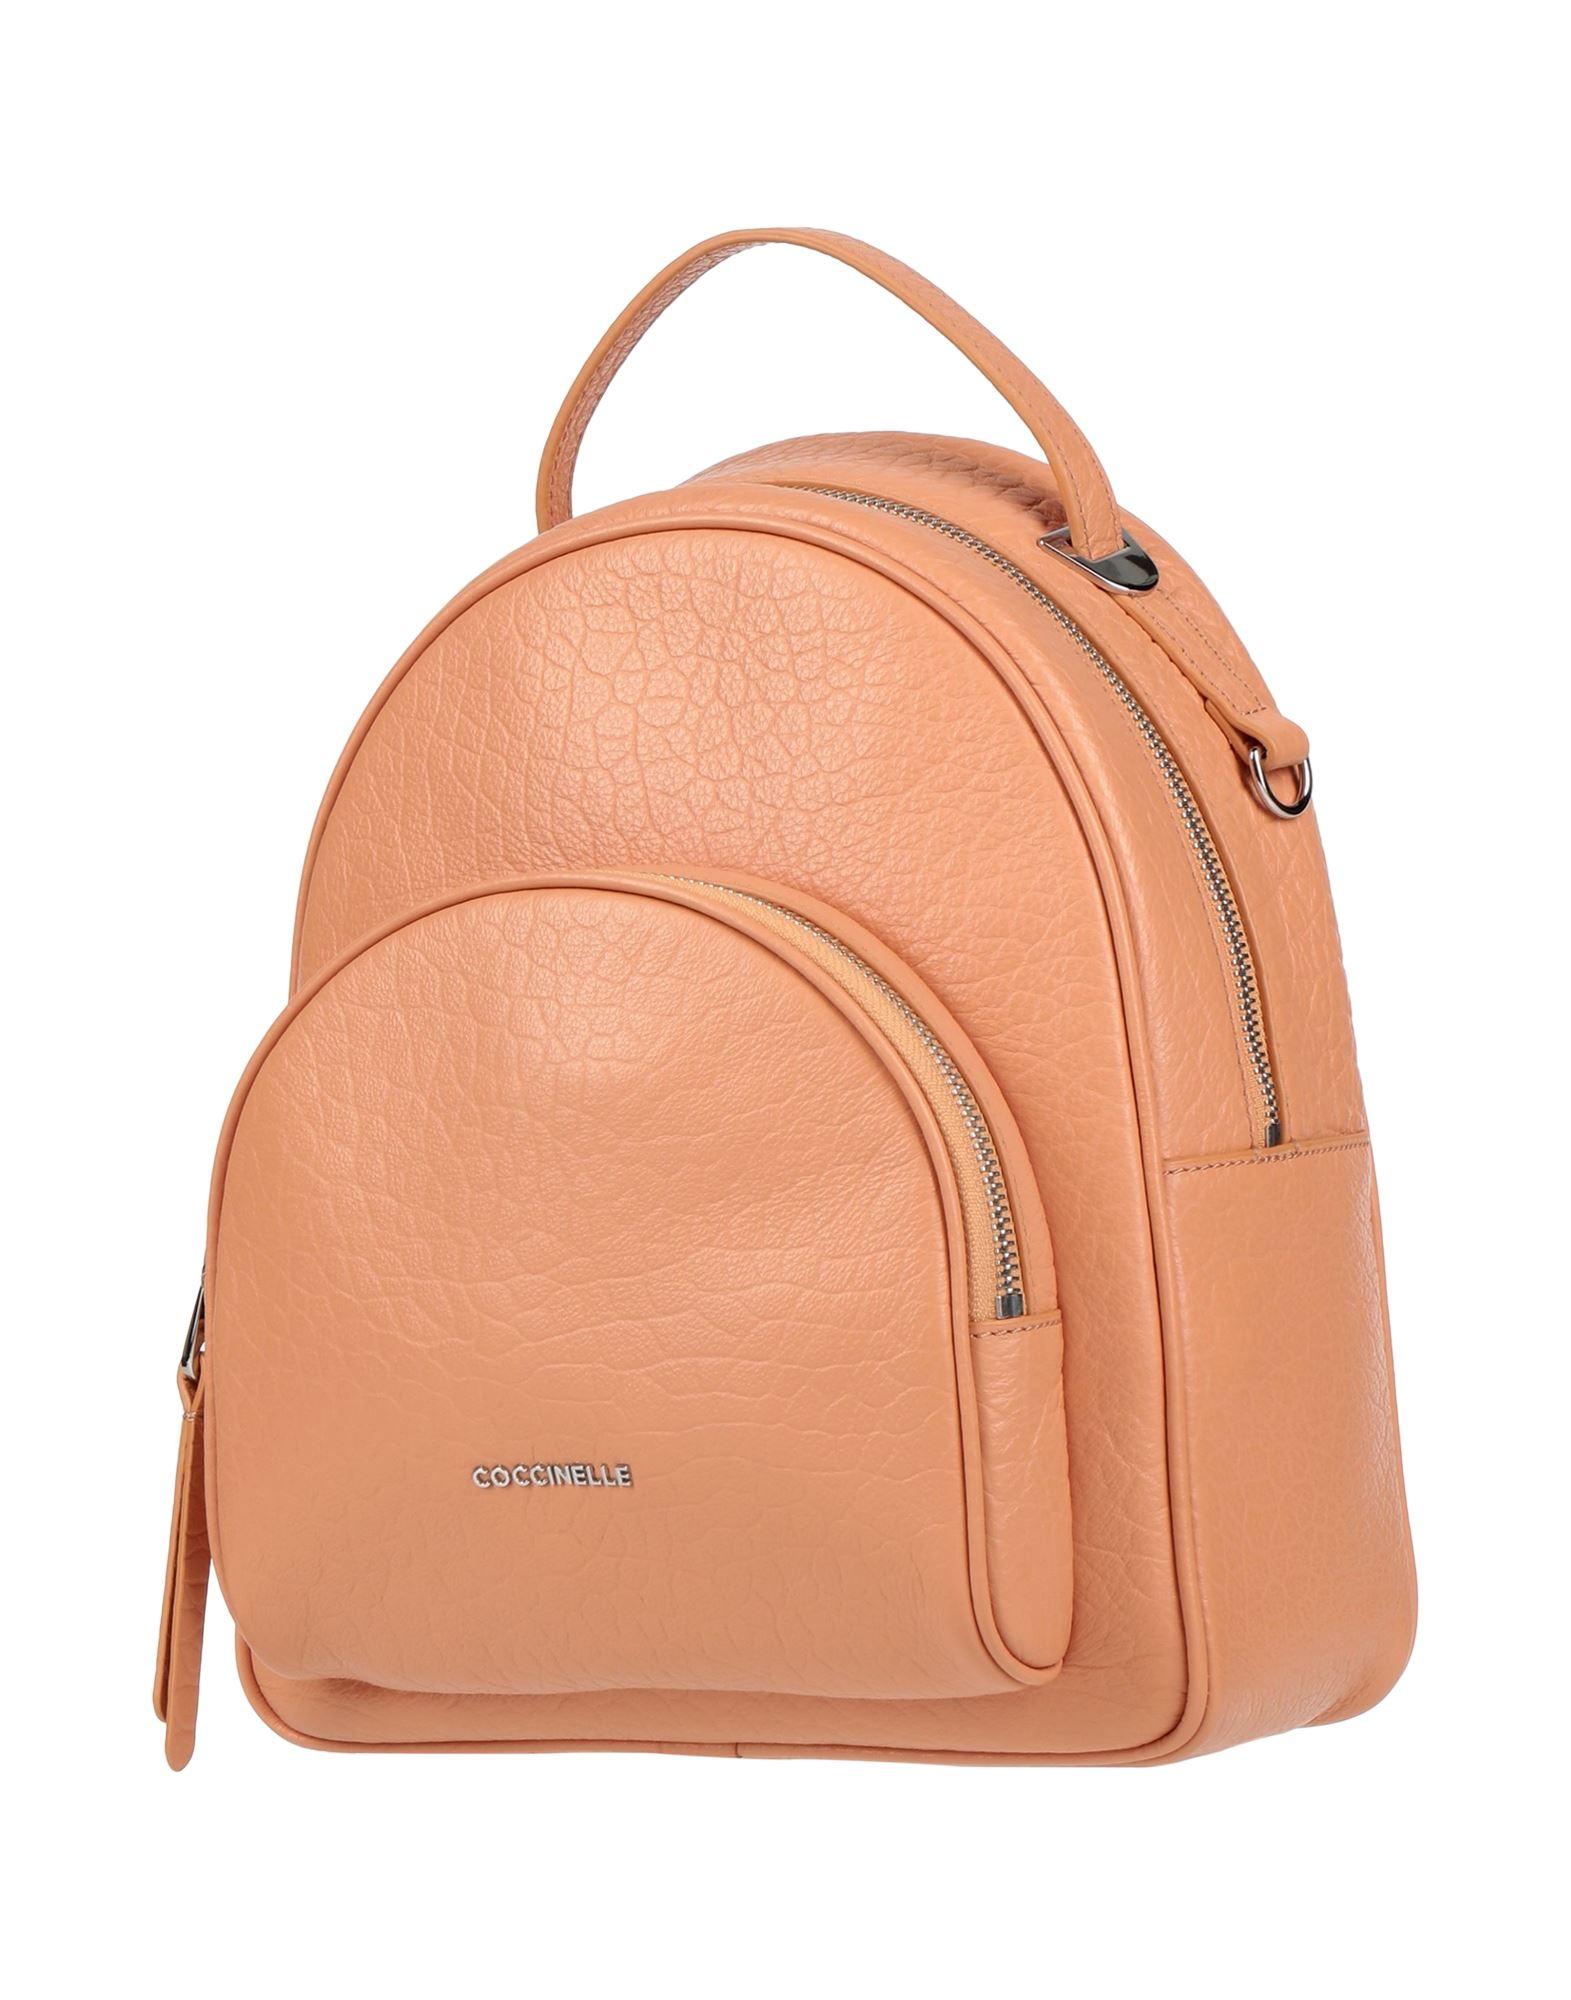 Coccinelle Leather Rucksack in Camel (Natural) | Lyst UK